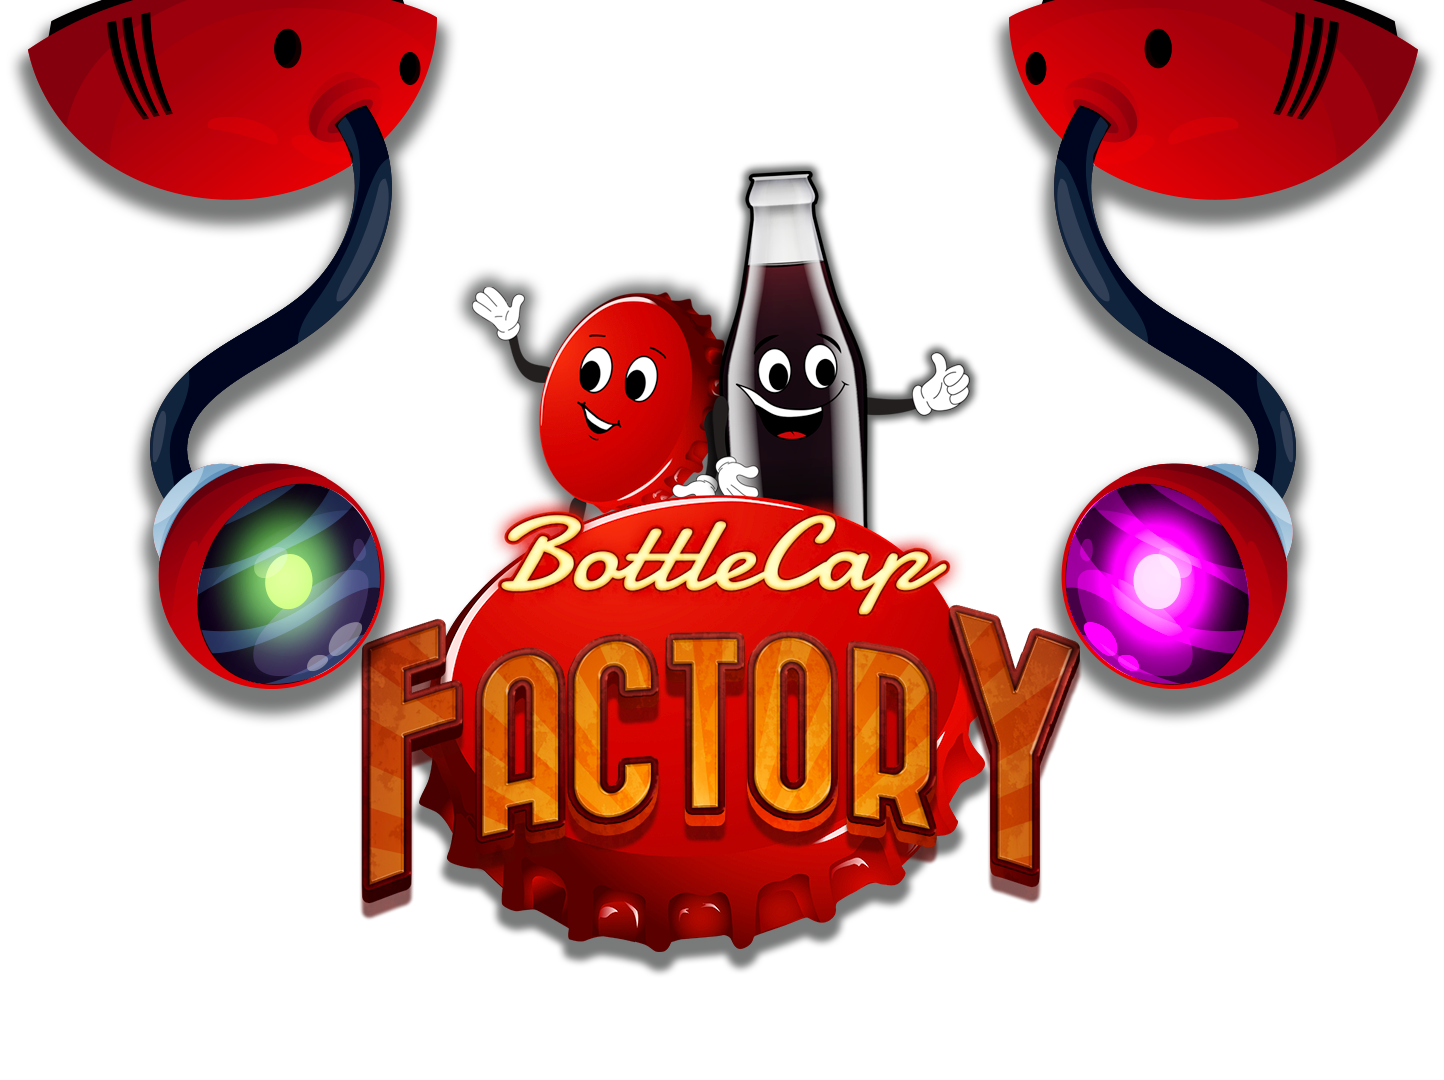 Bottlecap Factory with characters